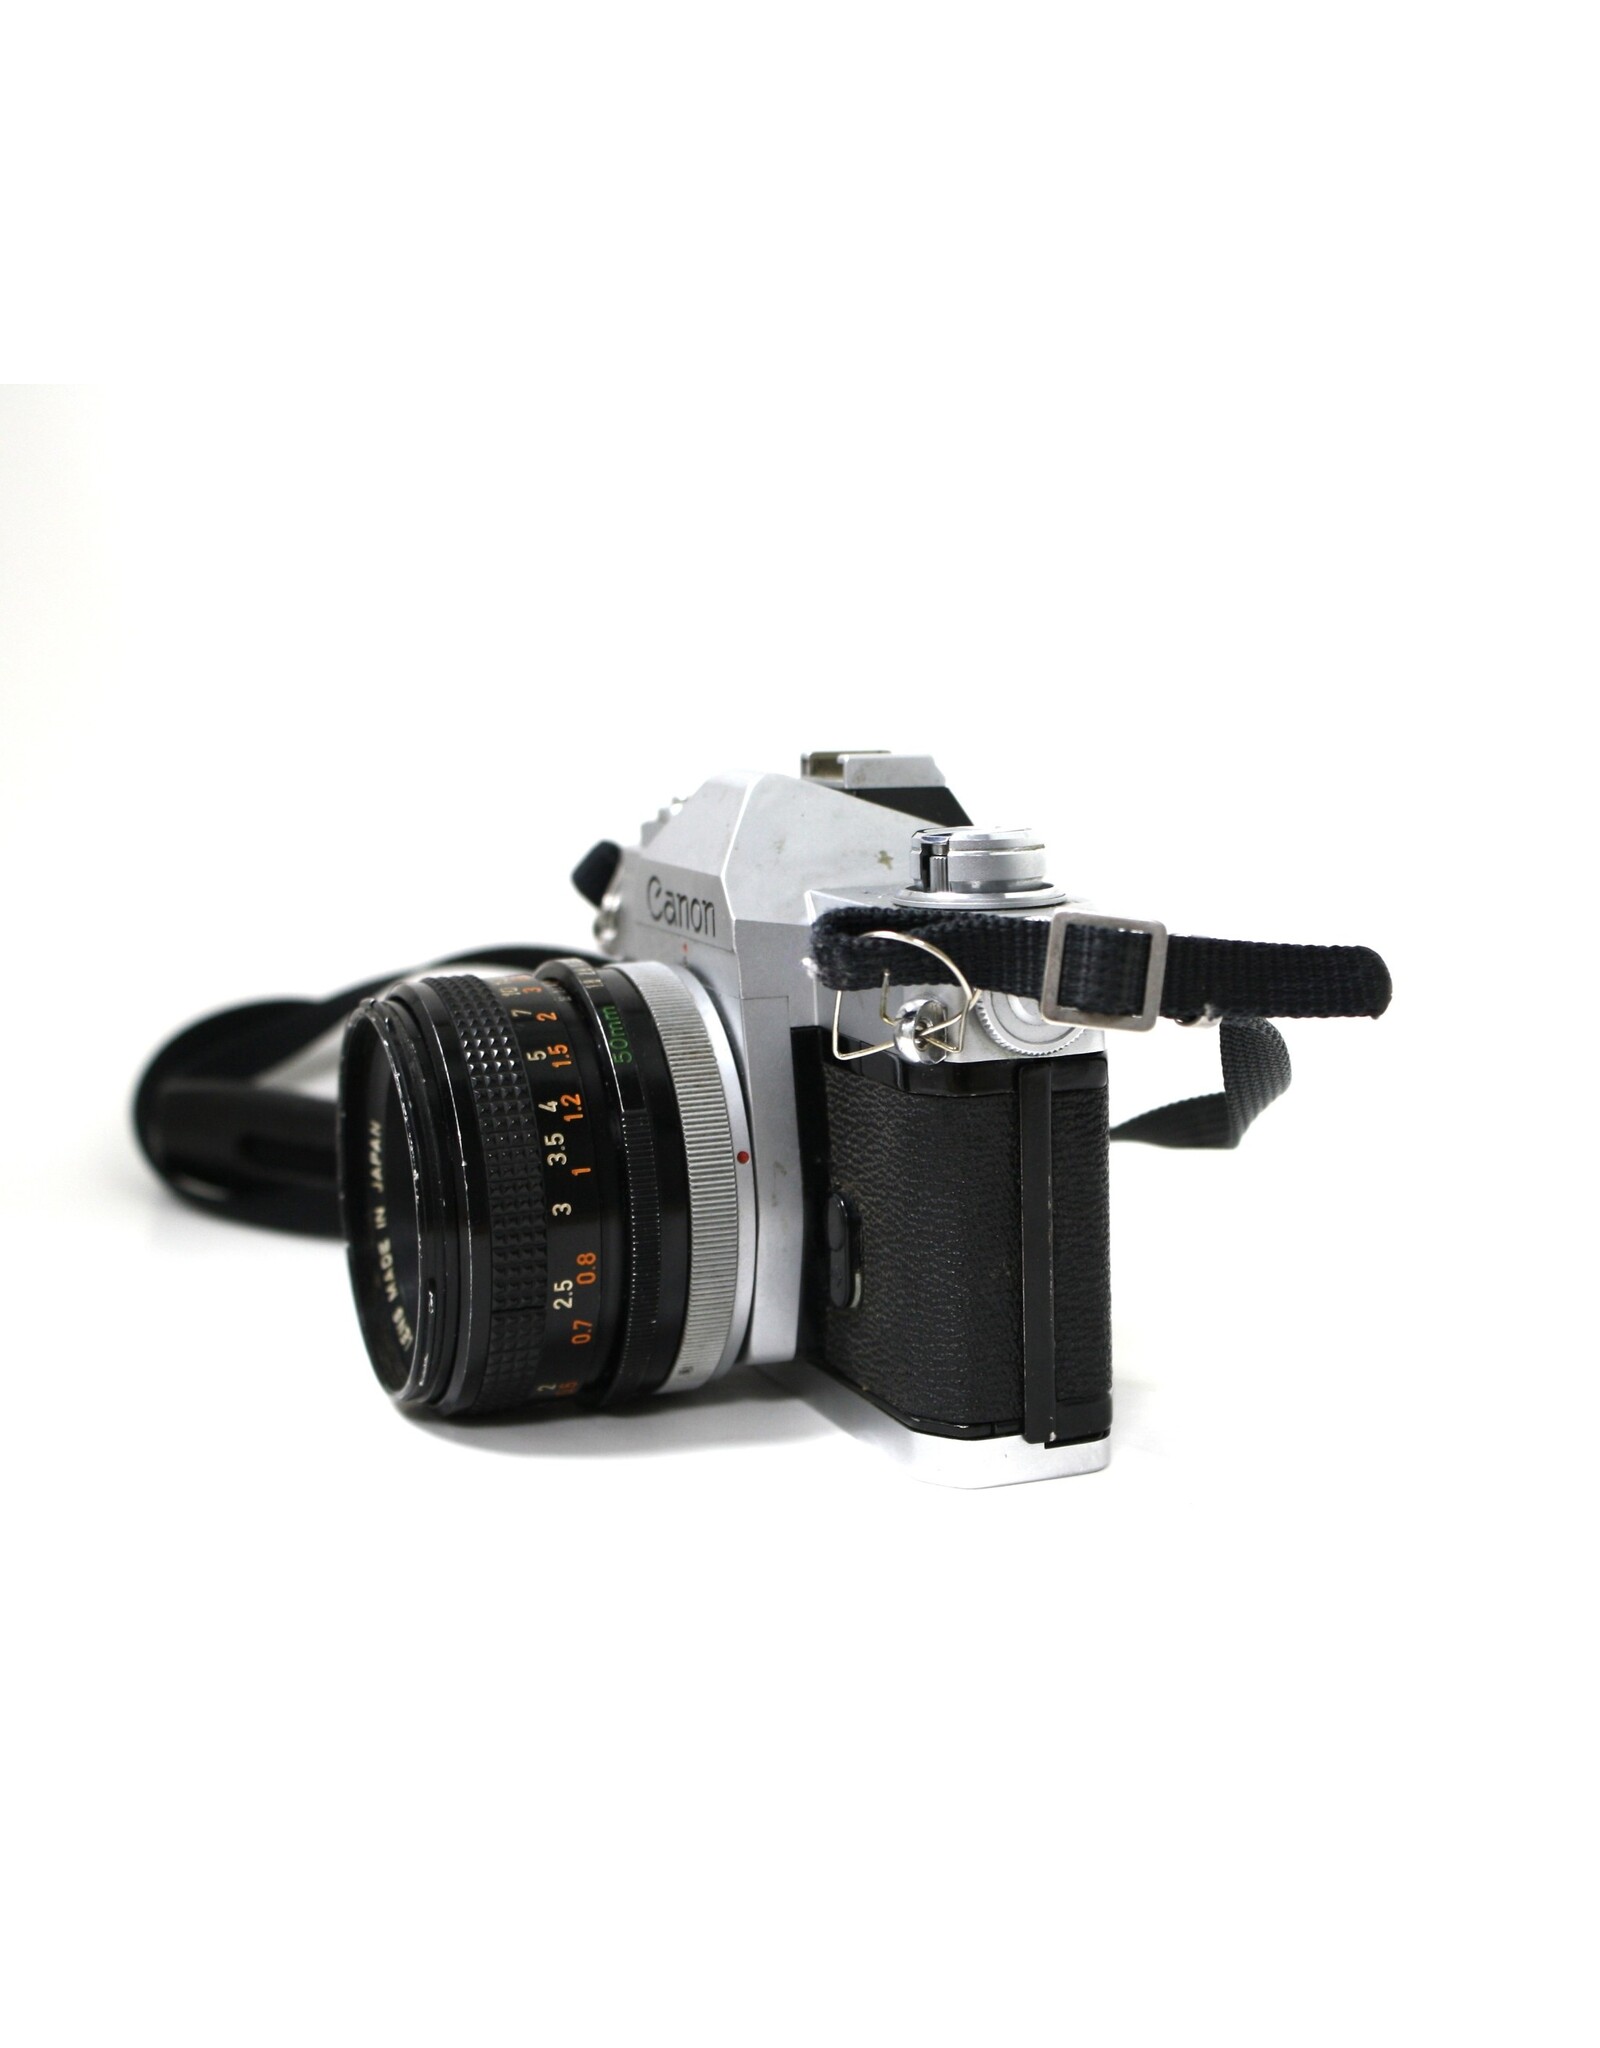 Canon FTb with 50mm lens (PRE-OWNED)